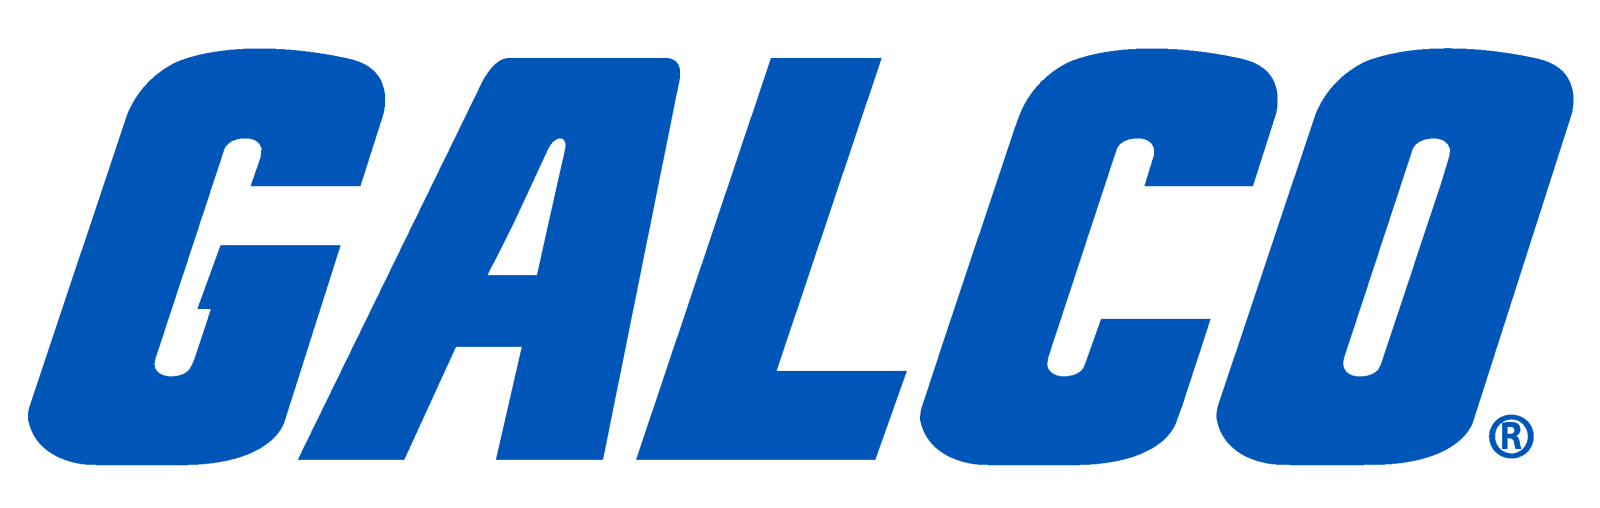 Galco industrial electronics